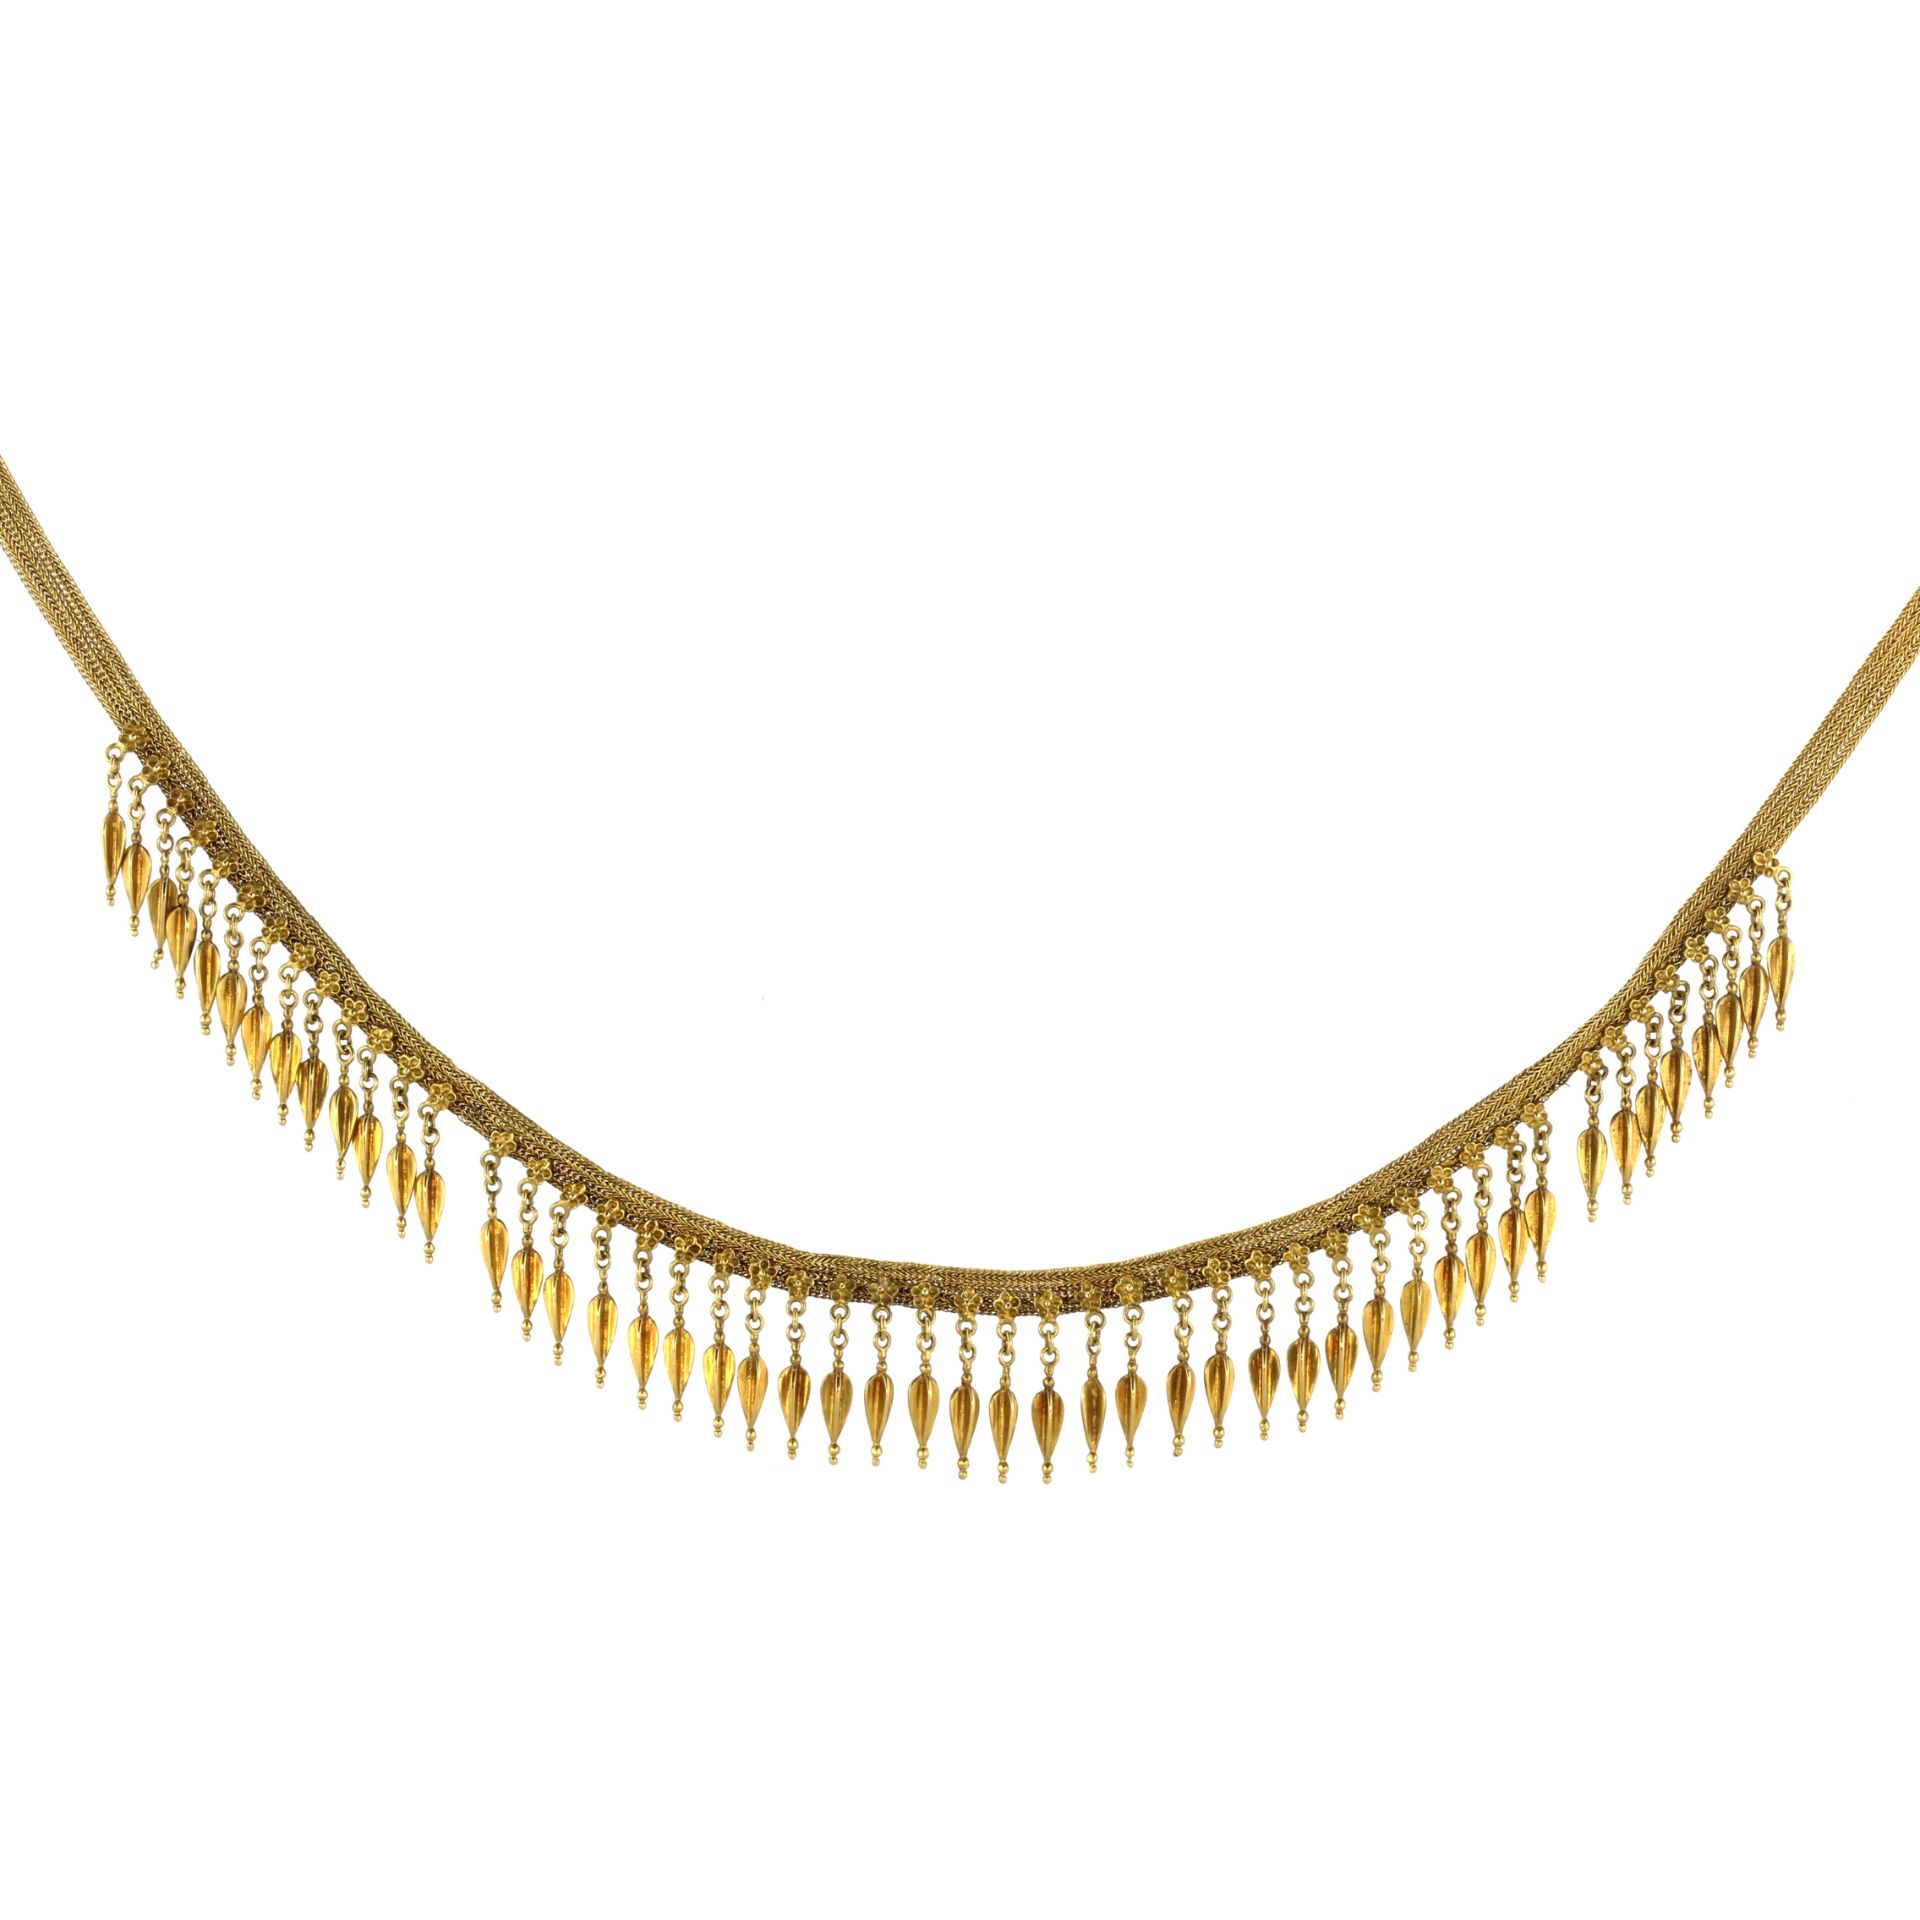 An Ancient Greecian / Hellenistic style necklace in 18ct yellow gold, designed after the necklace